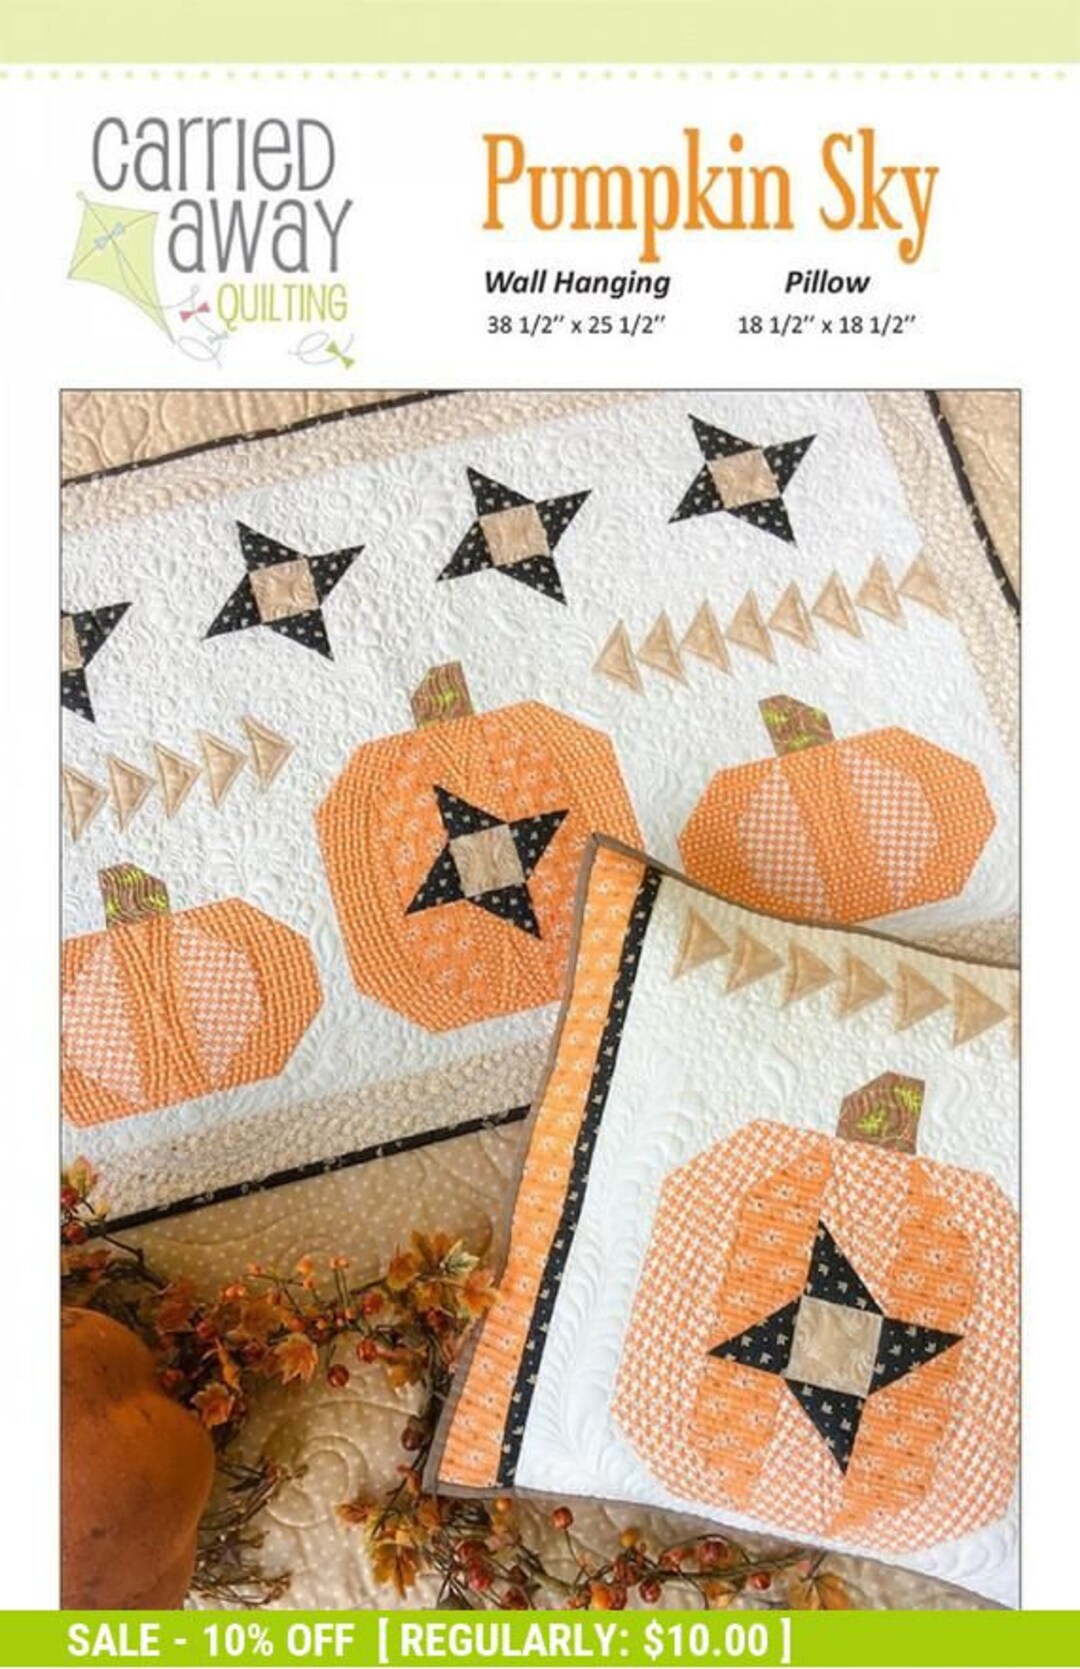 Carried Away Quilting Pumpkin Sky Pattern - Etsy